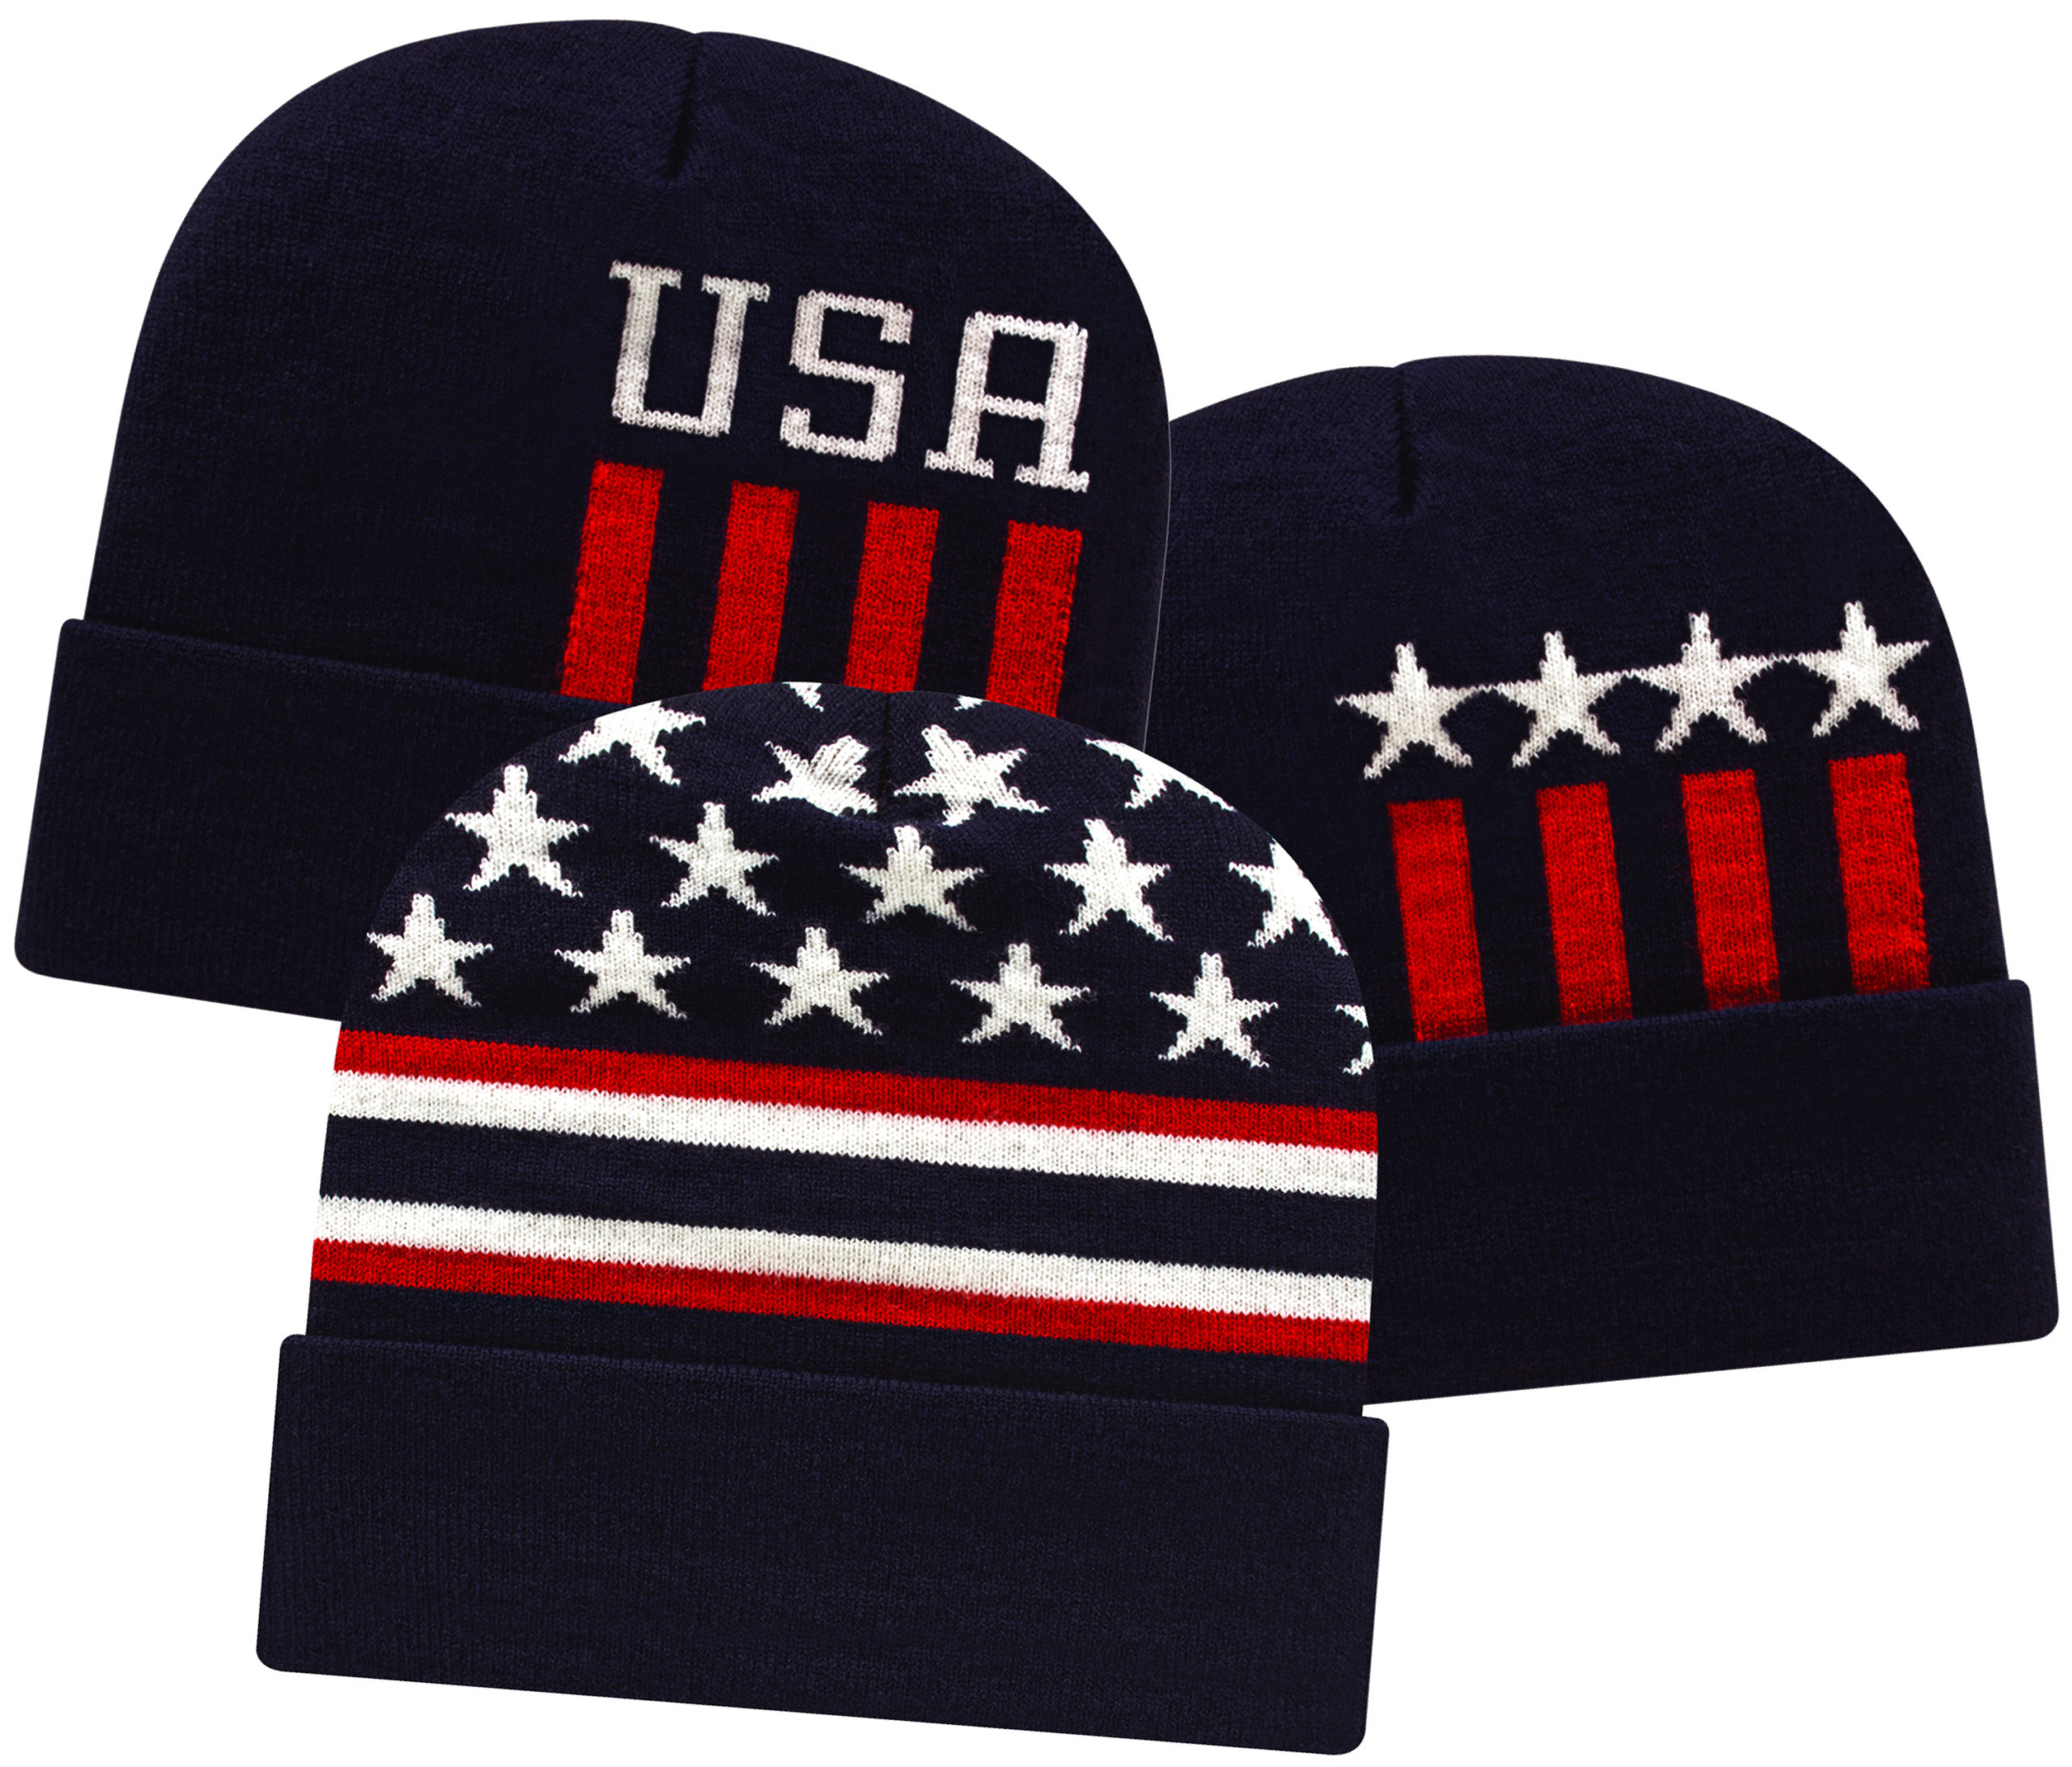 USA caps products